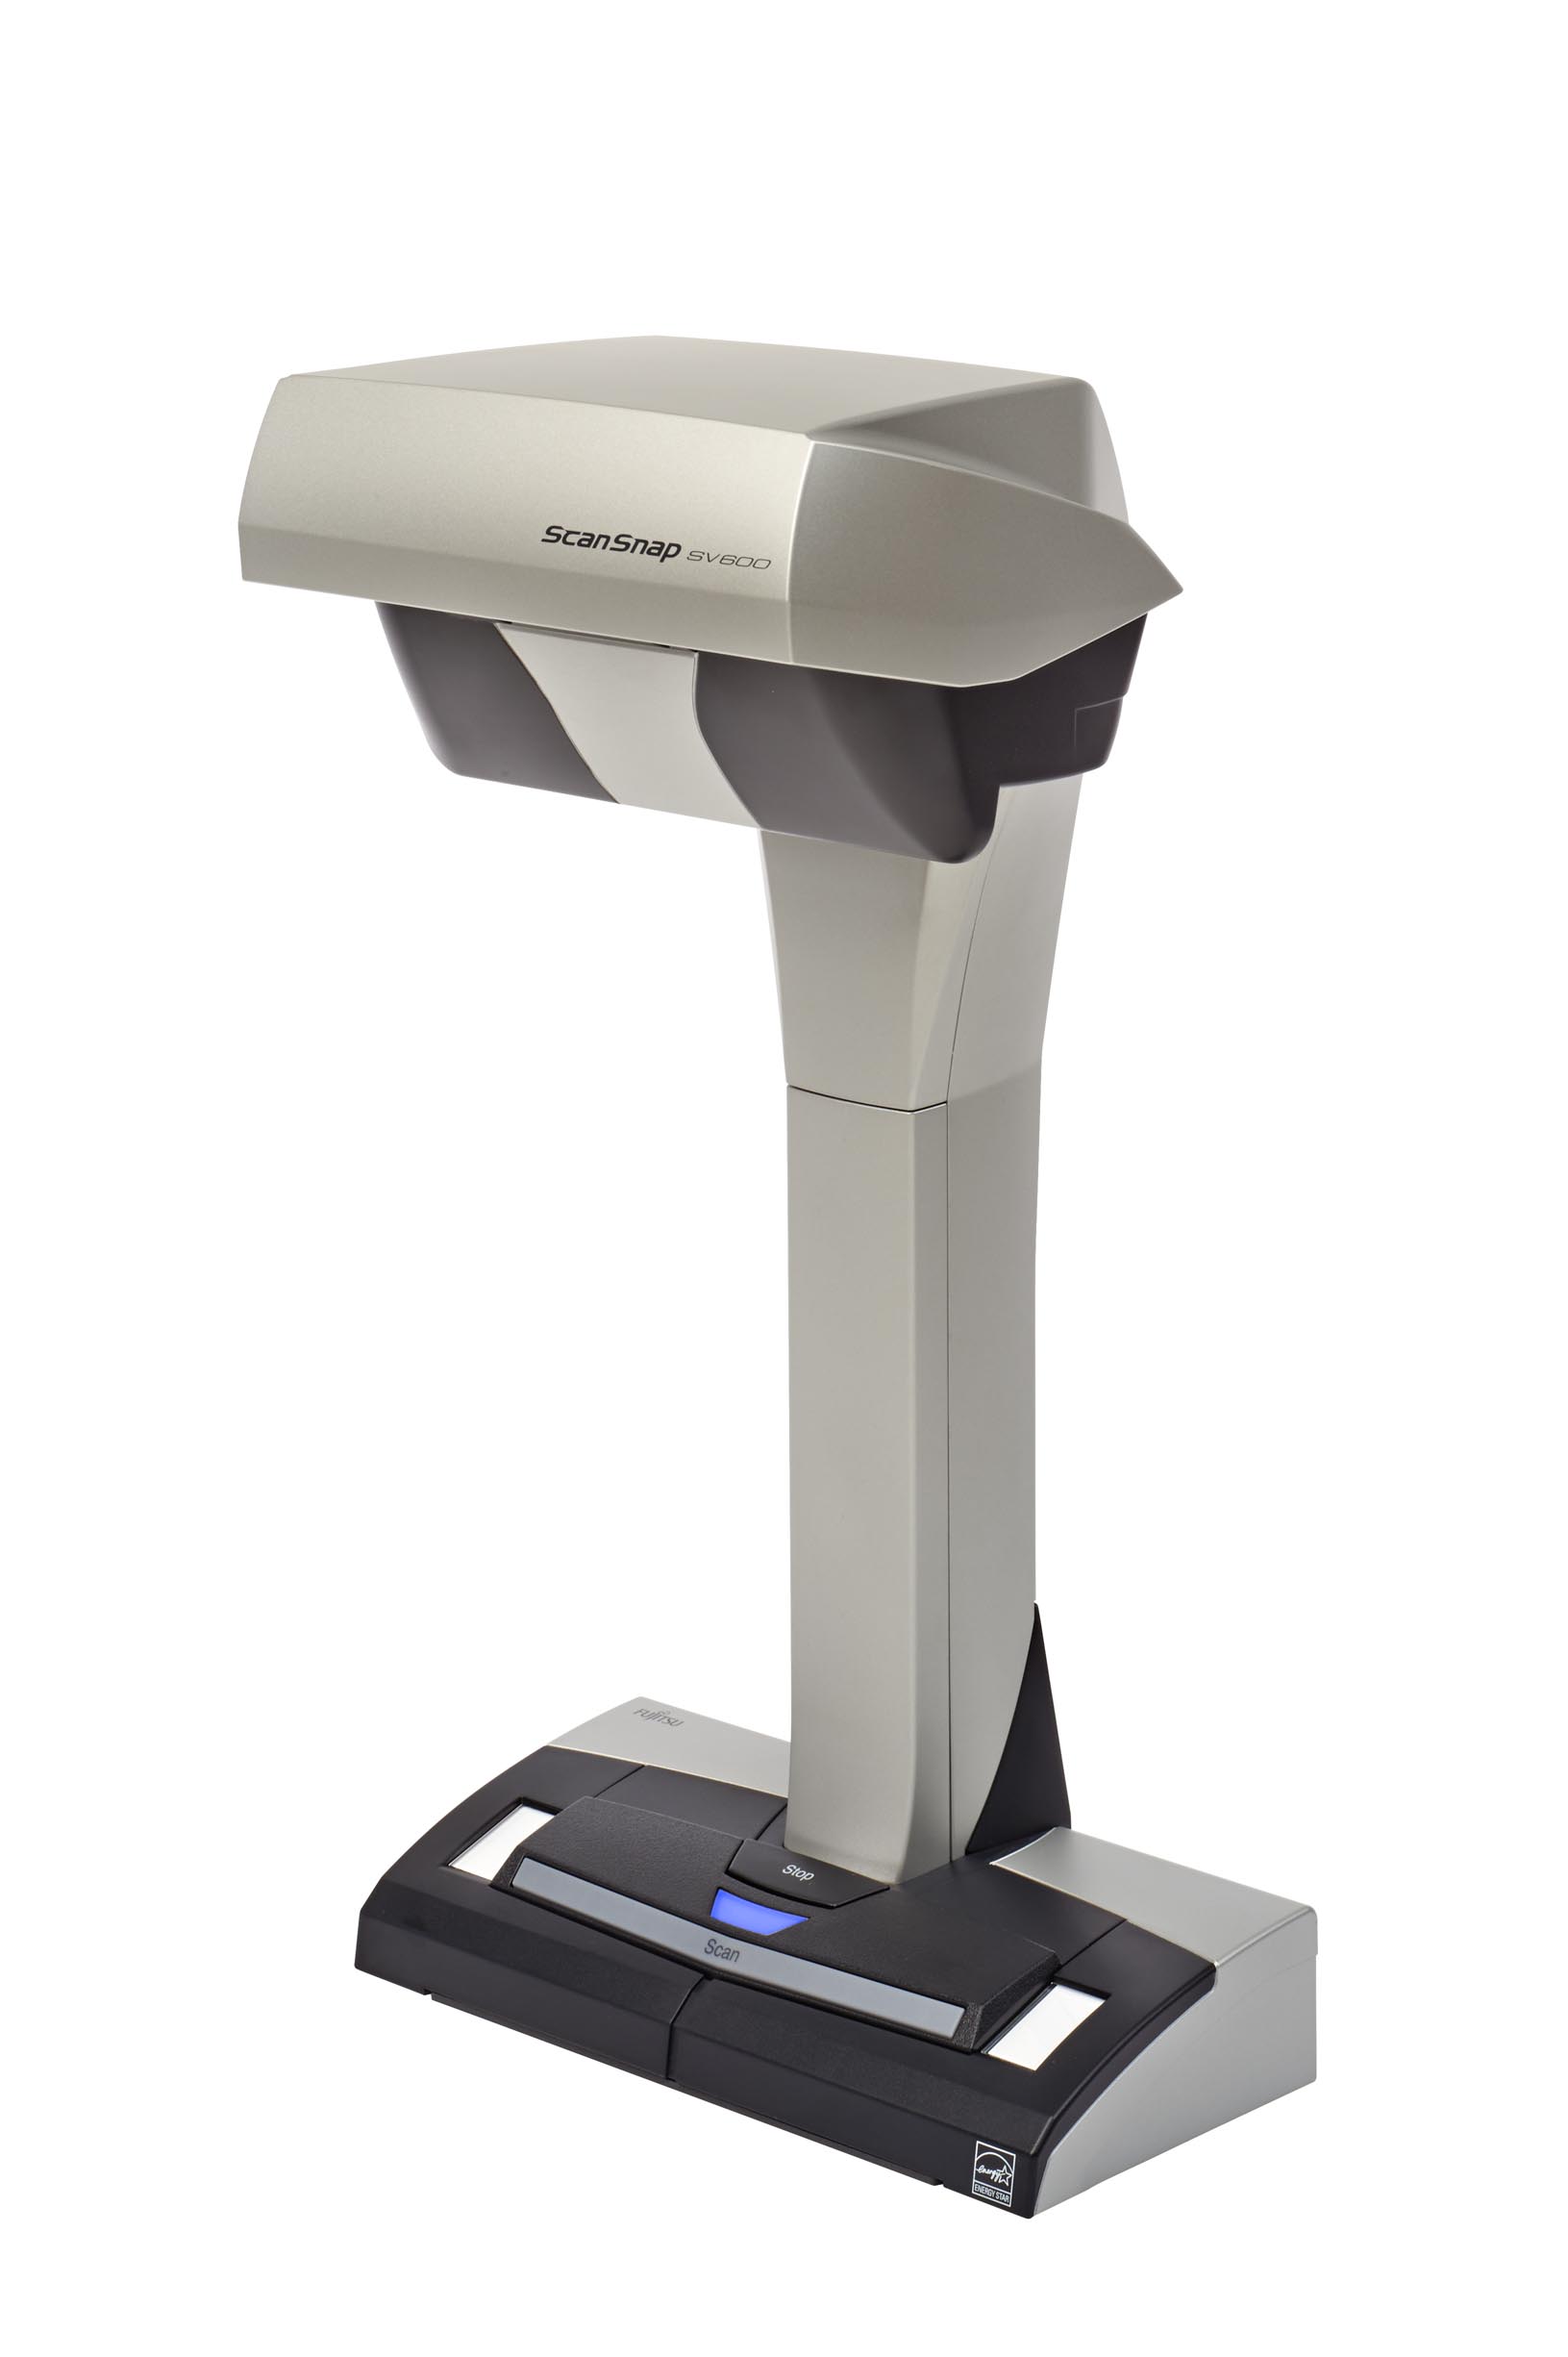 Fujitsu ScanSnap SV600 Scanner | CEO Image Systems